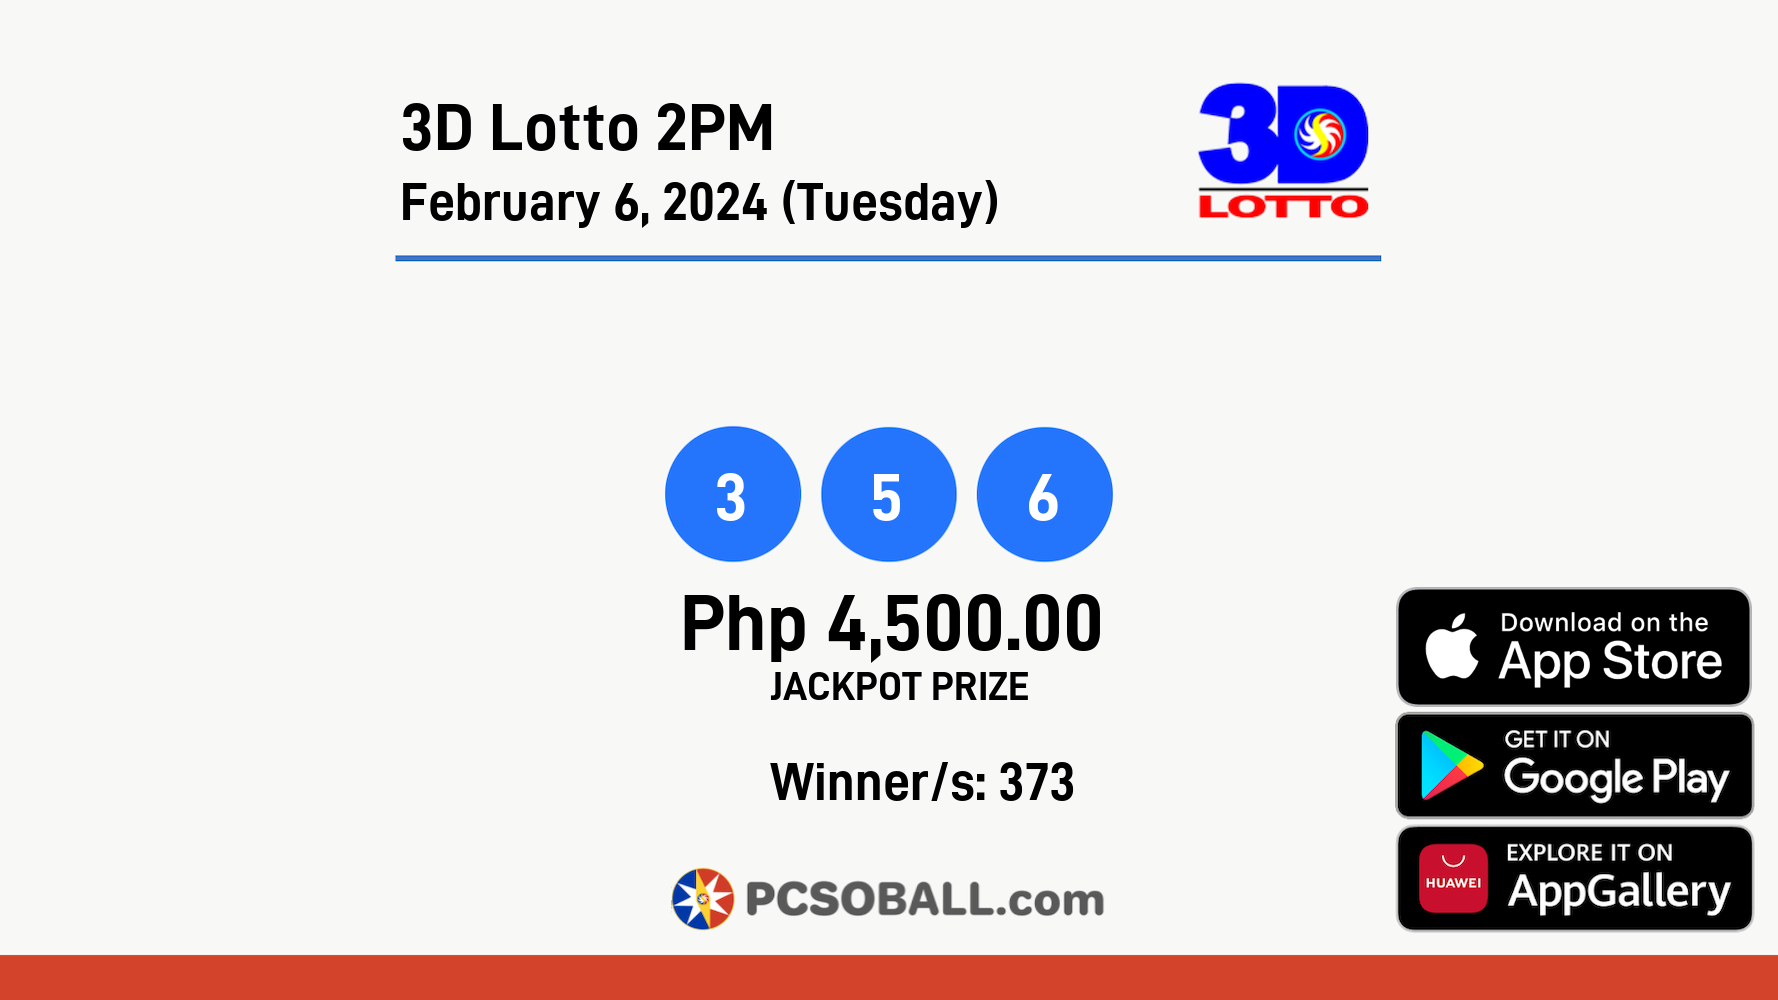 3D Lotto 2PM February 6, 2024 (Tuesday) Result